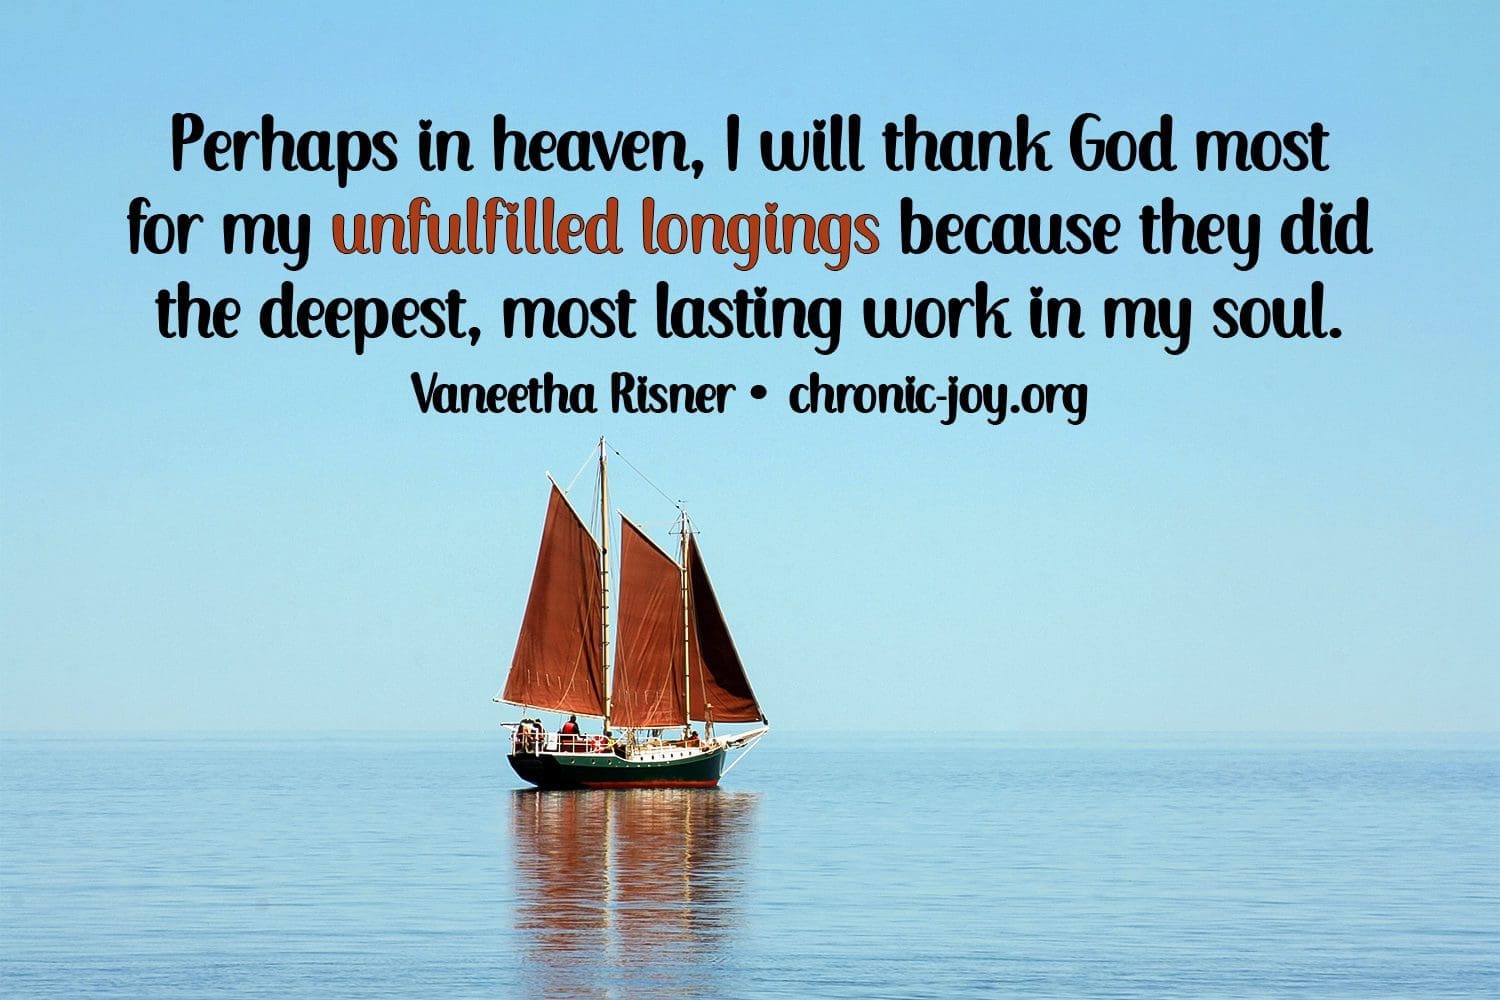 "Perhaps in heaven, I will thank God most for my unfulfilled longings because they did the deepest, most lasting work in my soul." Vaneetha Risner